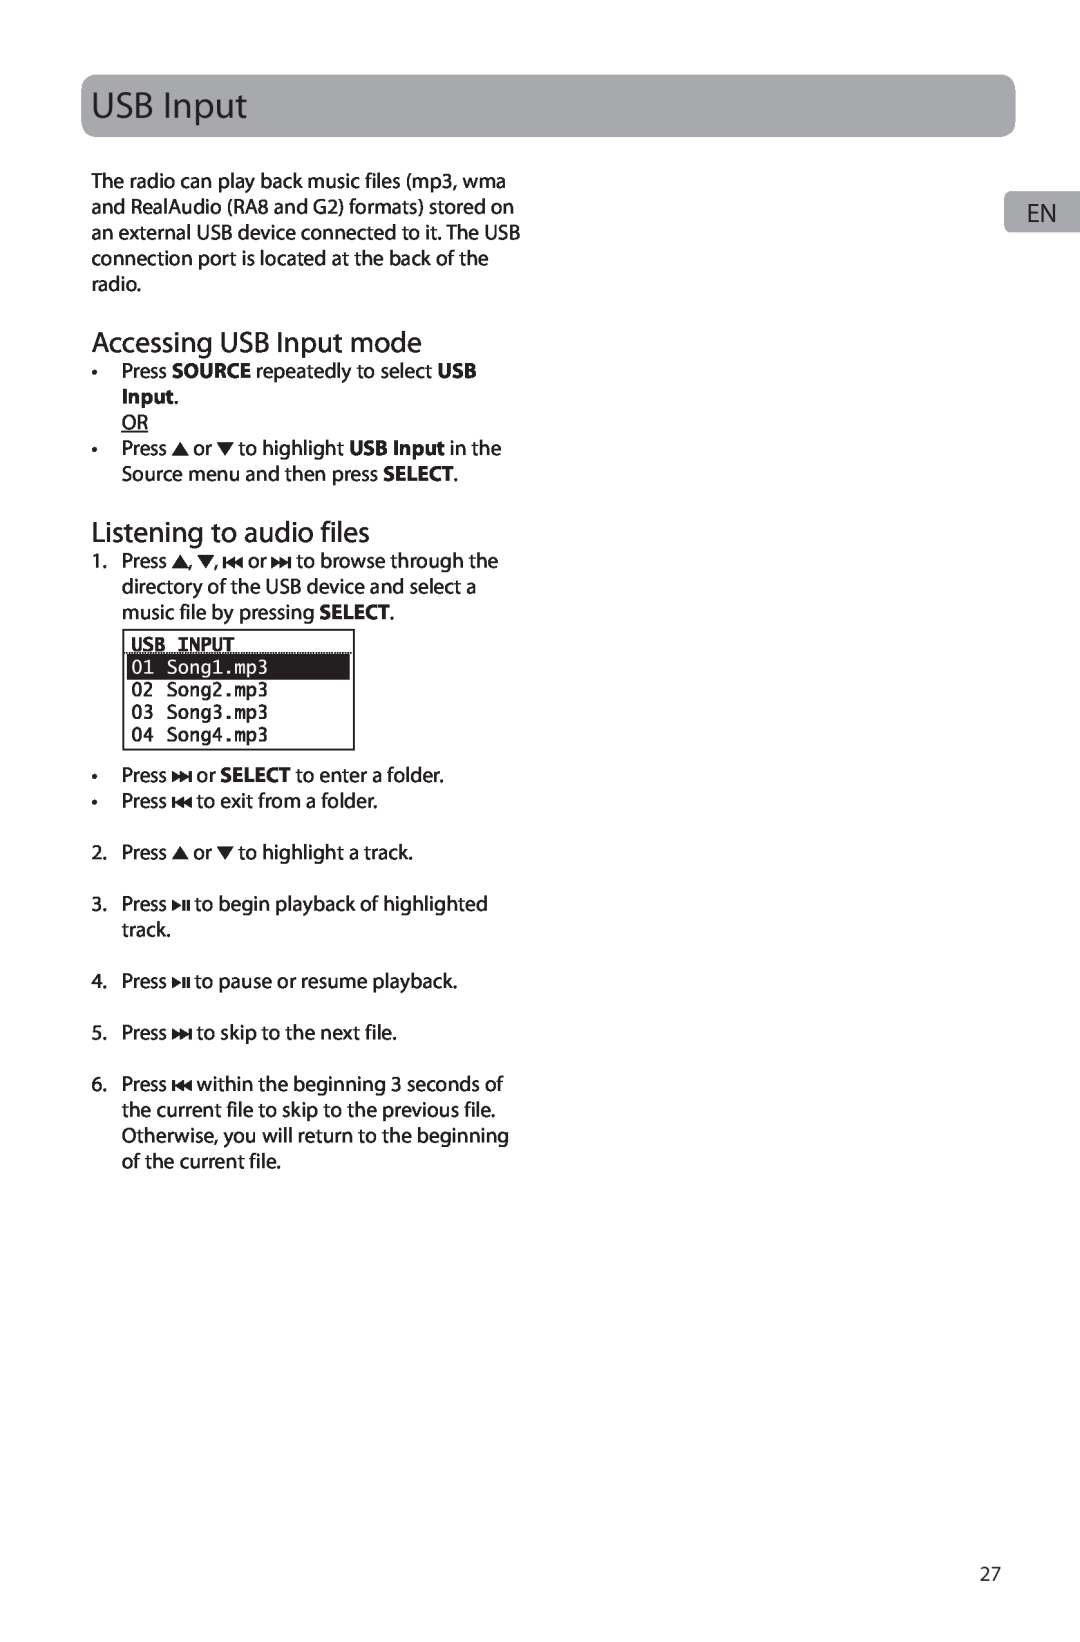 Acoustic Research ARIR201 user manual Accessing USB Input mode, Listening to audio files 